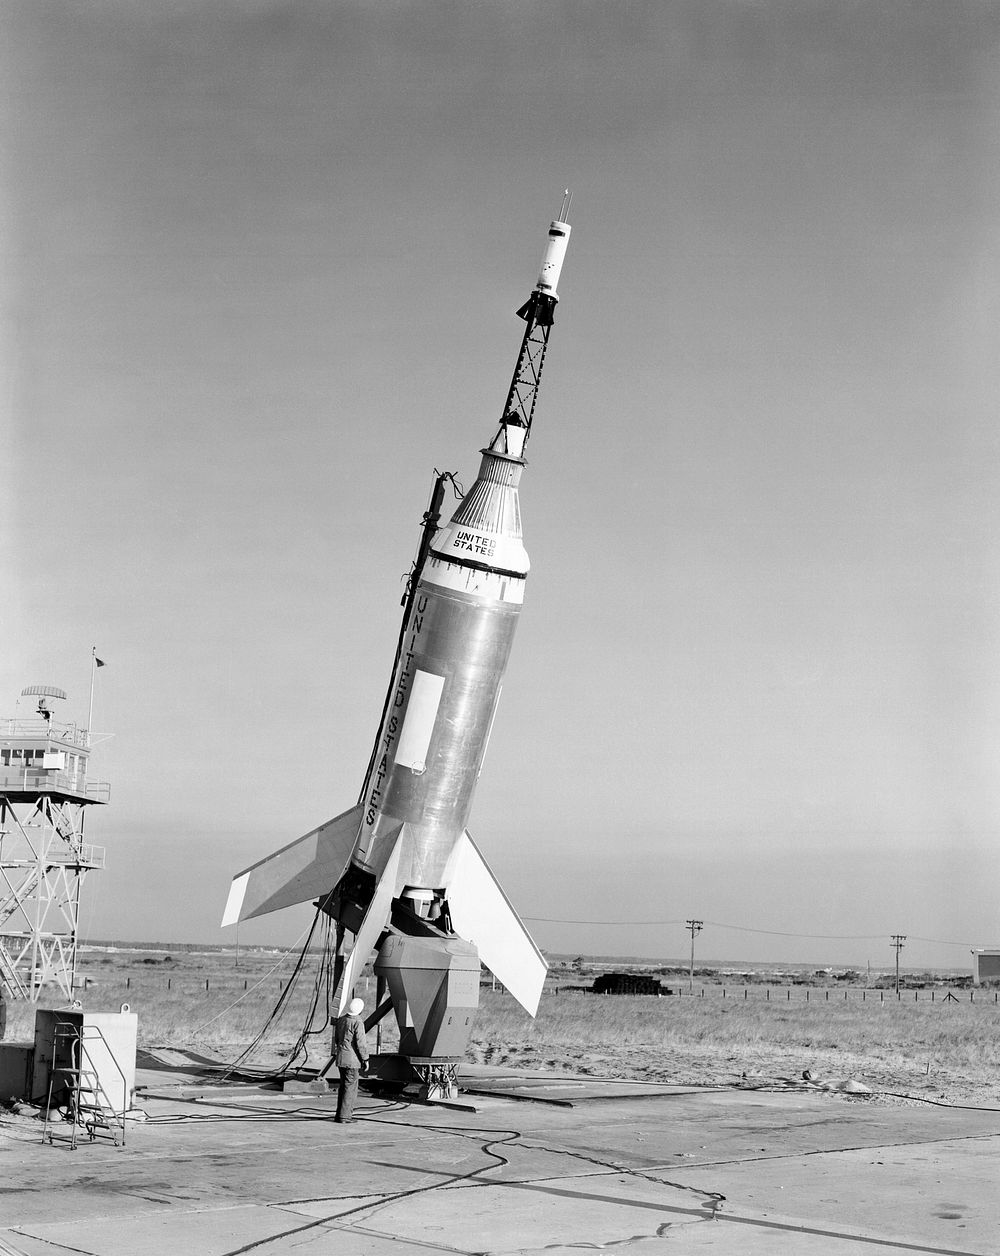 The Little Joe launch vehicle being readied for a test launch from Wallops in January 1960. Original from NASA. Digitally…